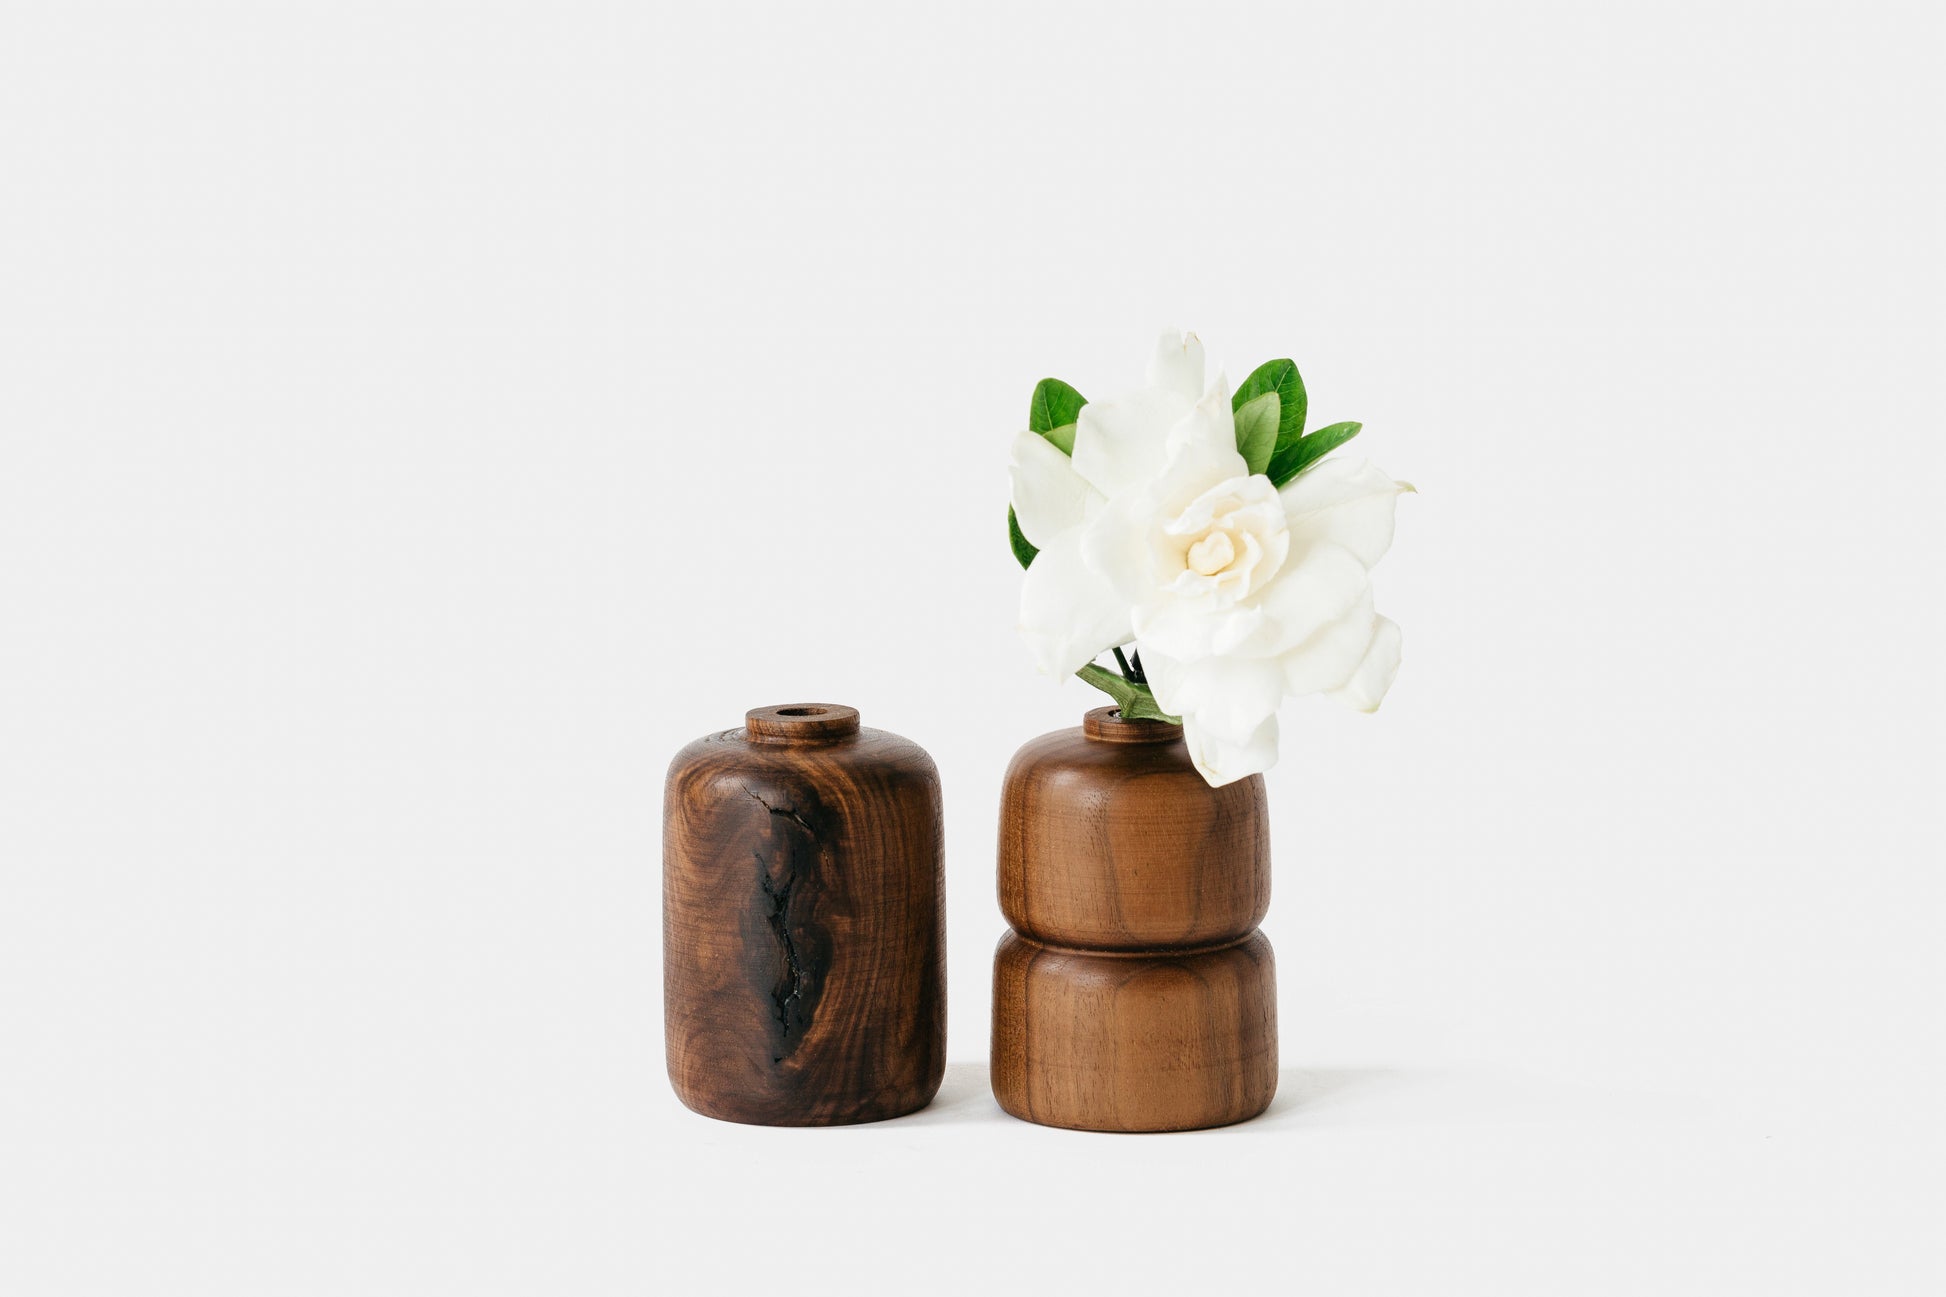 Two walnut bud vases, one holding a flower. By Melanie Abrantes Designs.